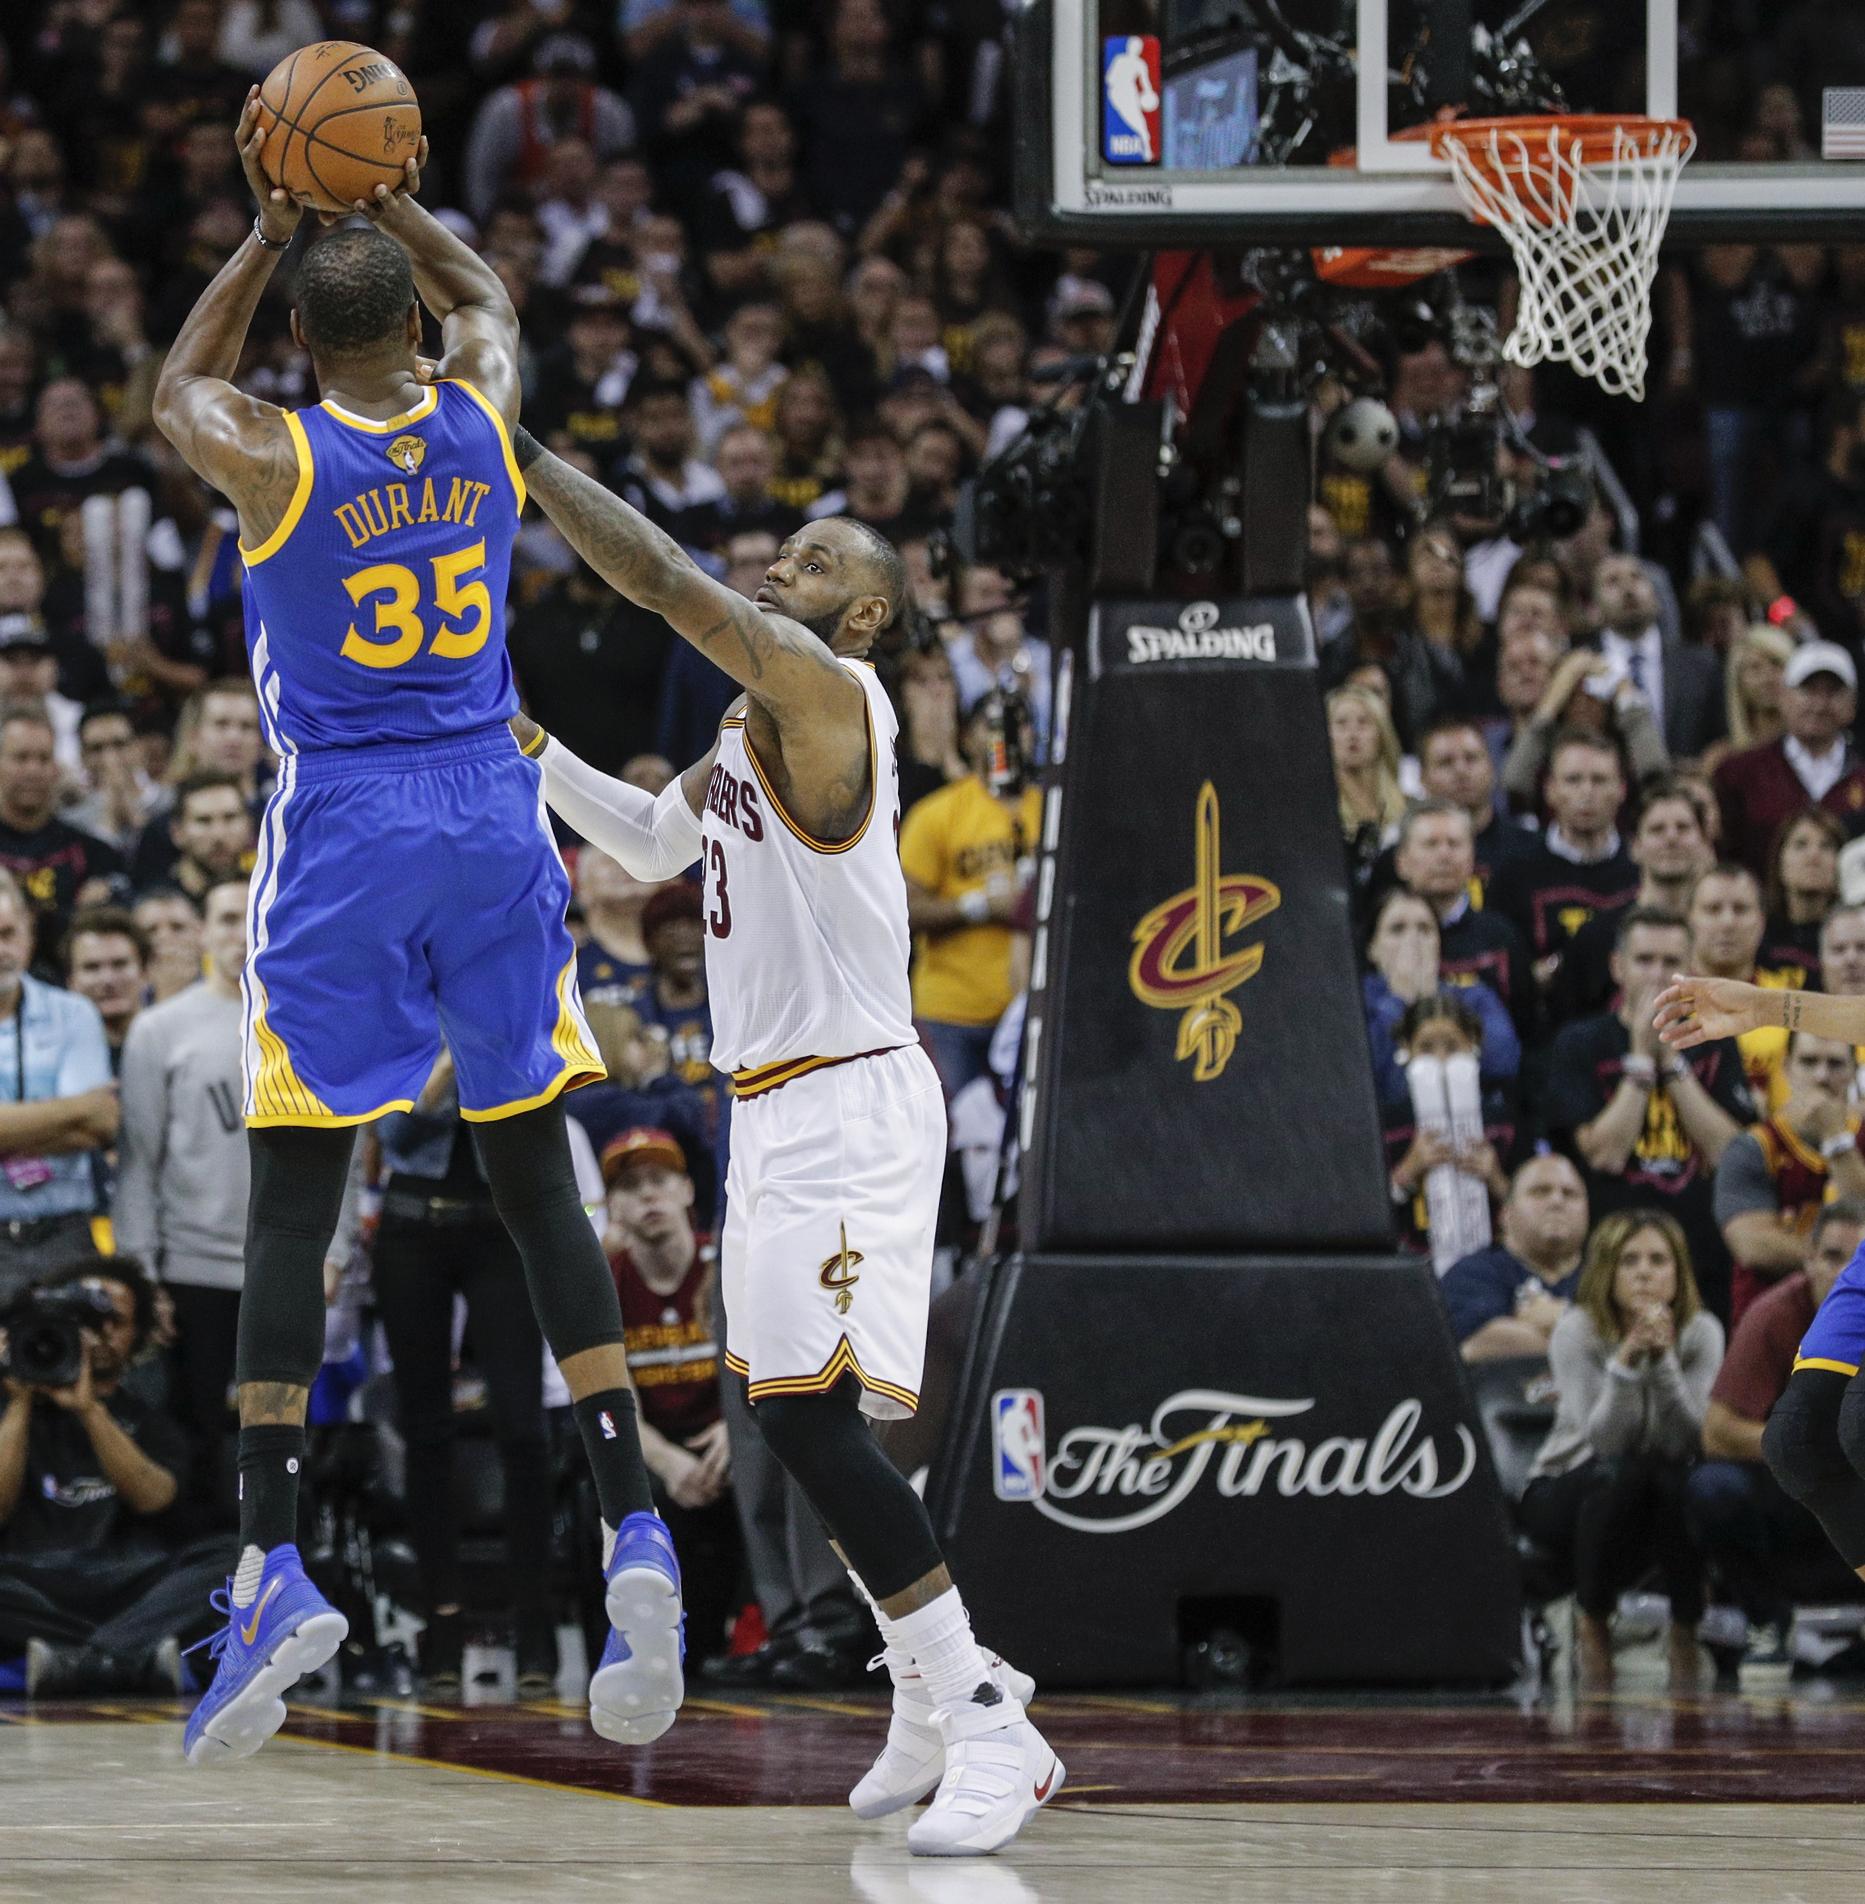 Durant takes over Game 3 finale, makes shots that seal Cavs’ fate - SFGate1865 x 1904